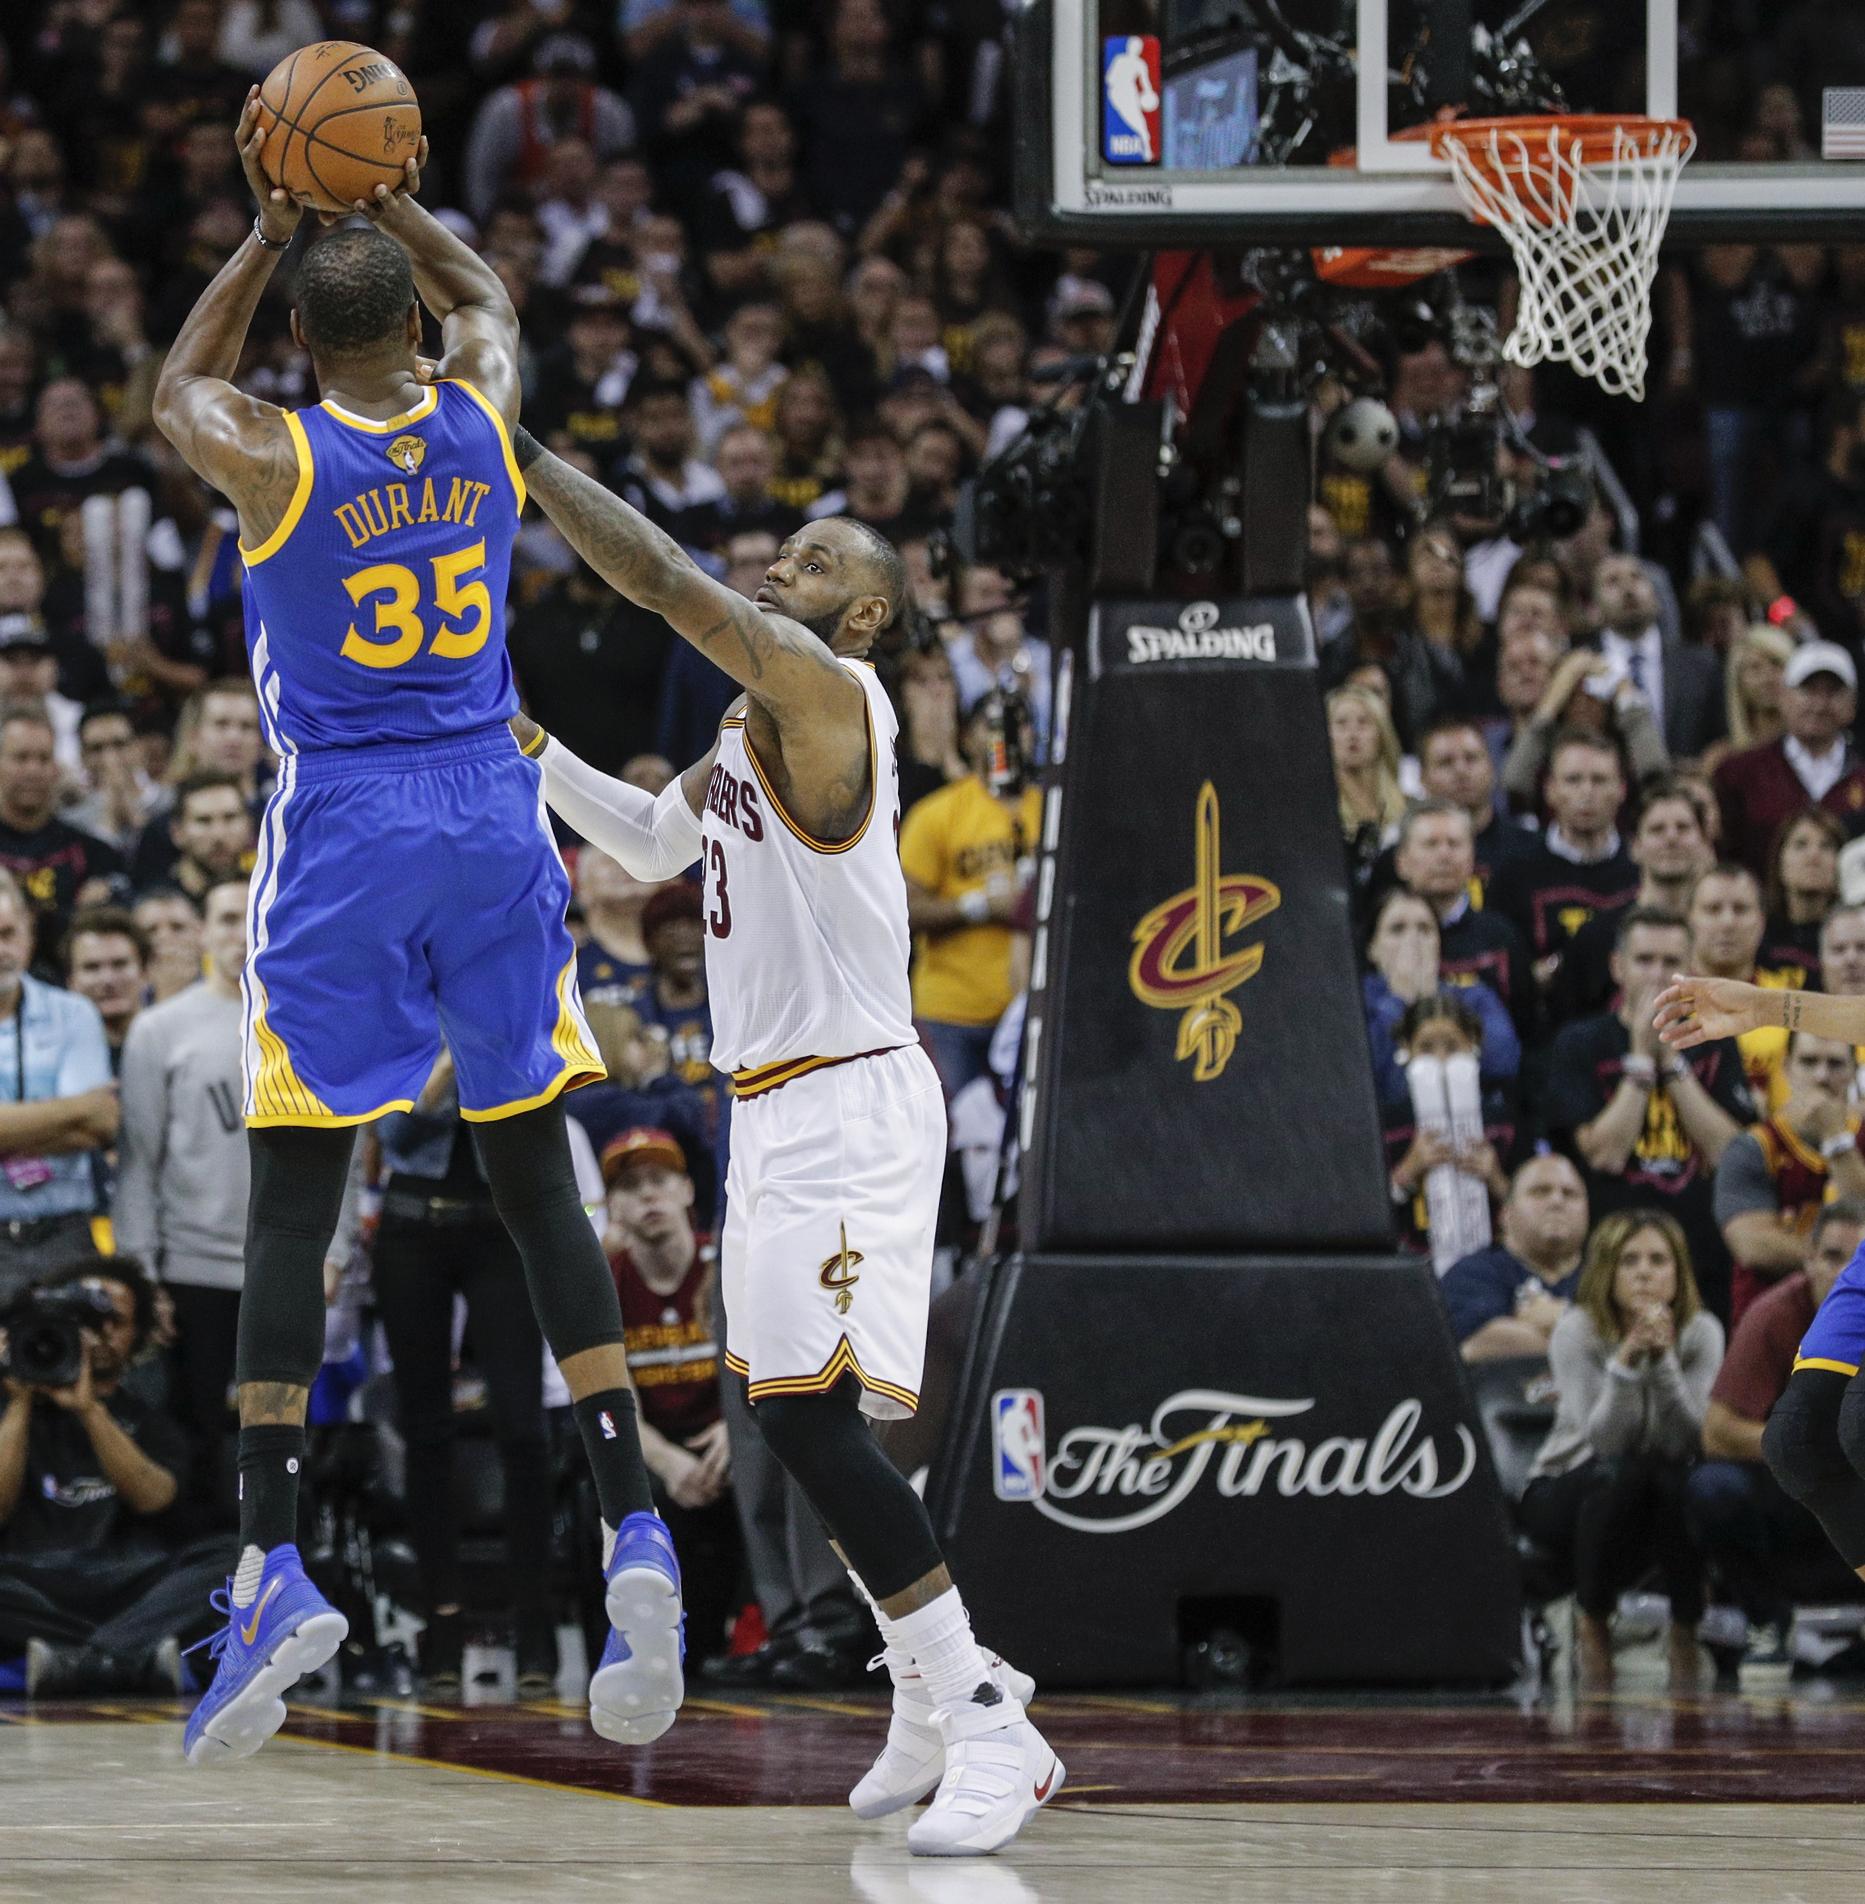 Durant takes over Game 3 finale, makes shots that seal Cavs’ fate - SFGate1865 x 1904